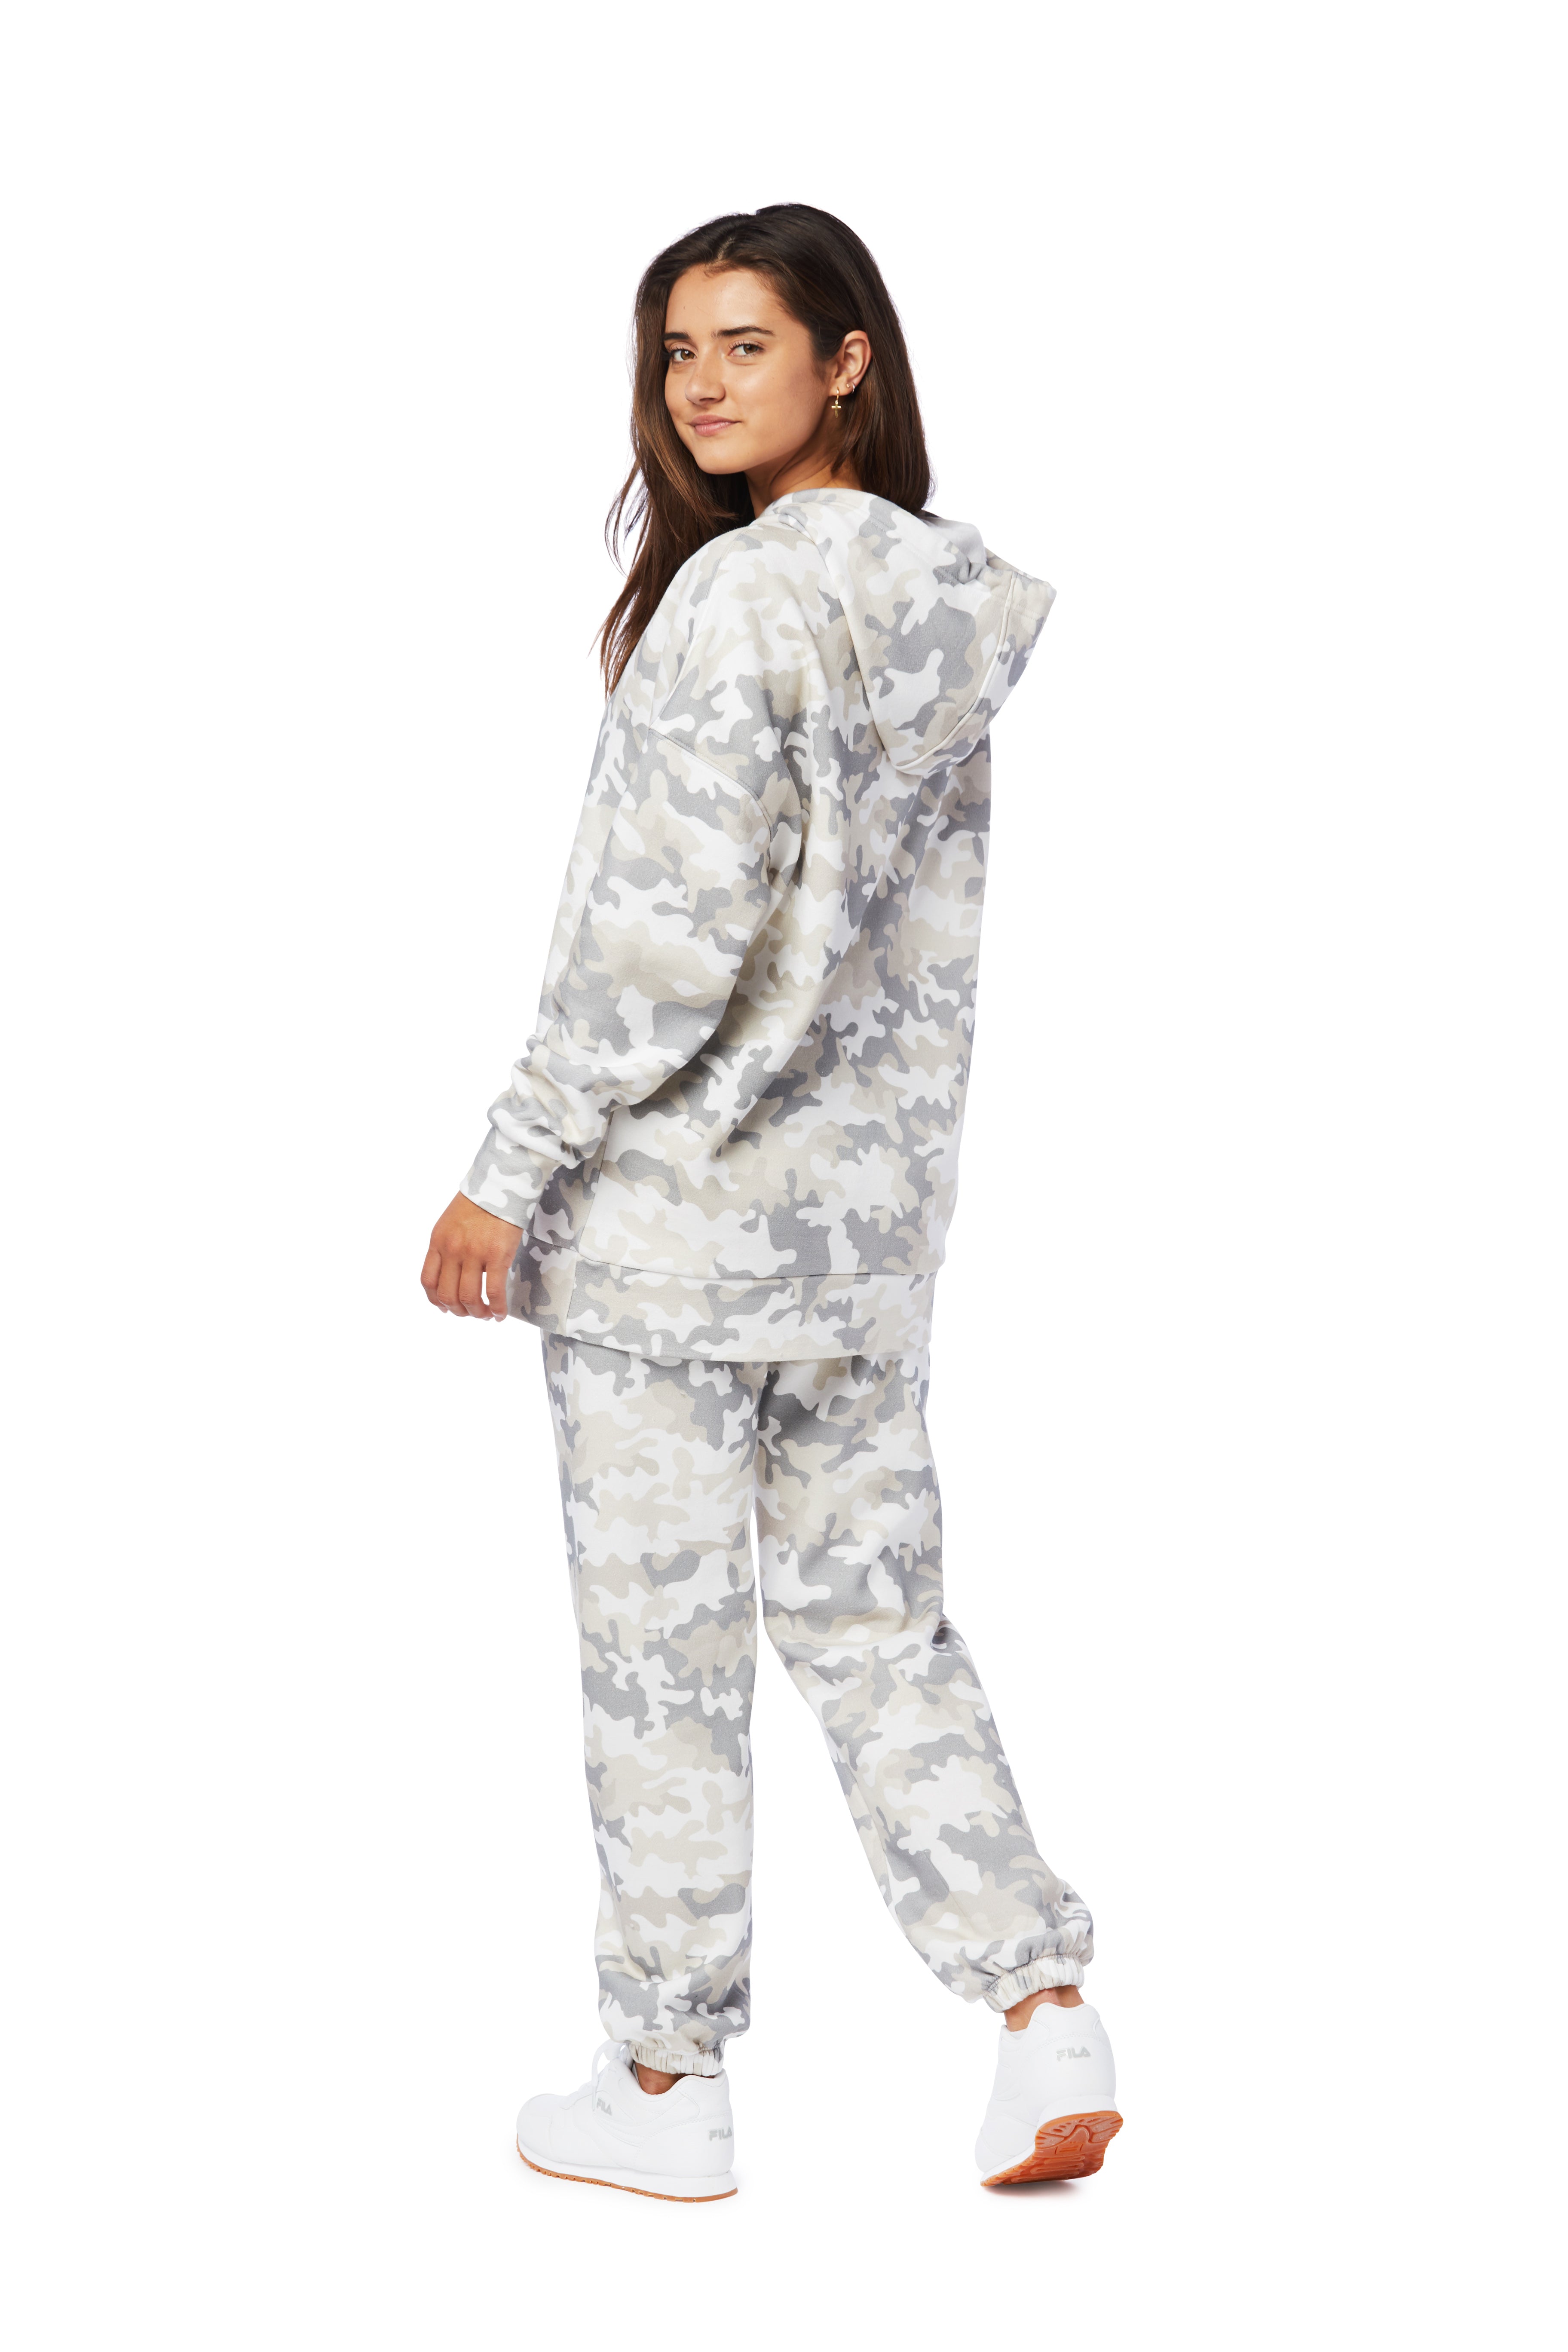 Niki &amp; Cooper fleece set in white camo from Lazypants - always a great buy at a reasonable price.